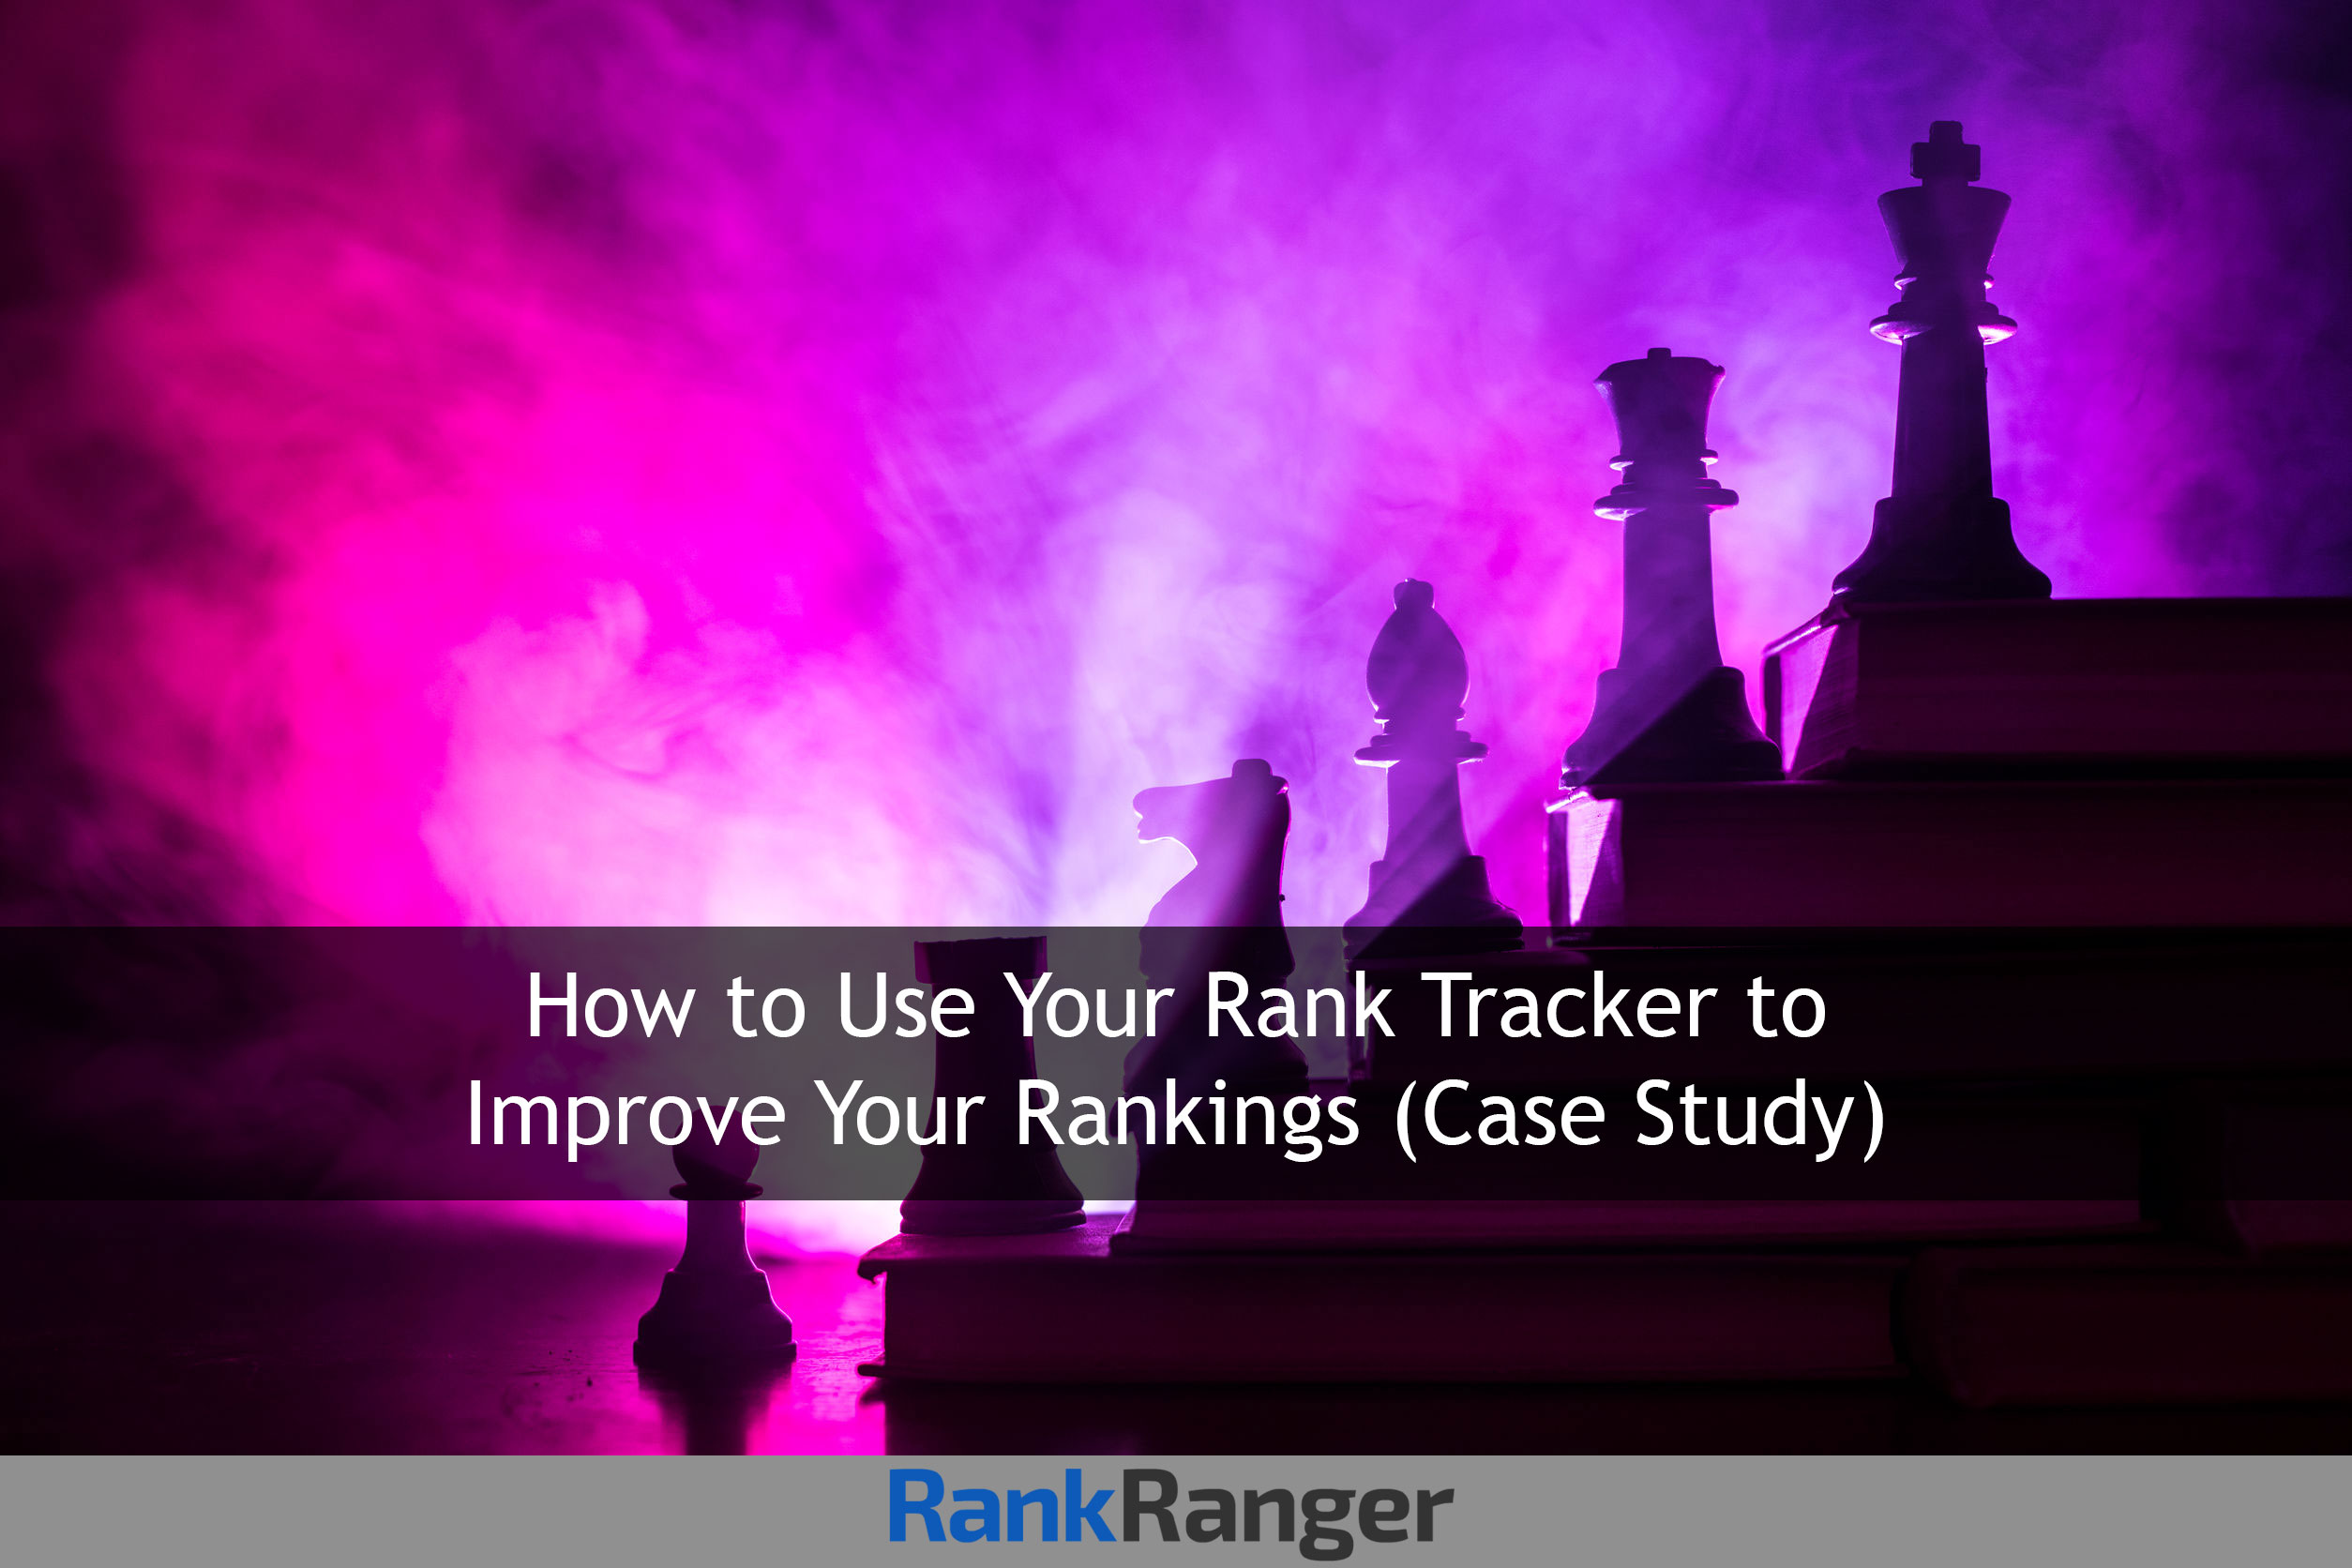 How to Use Your Rank Tracker to Improve Your Rankings (Case Study)